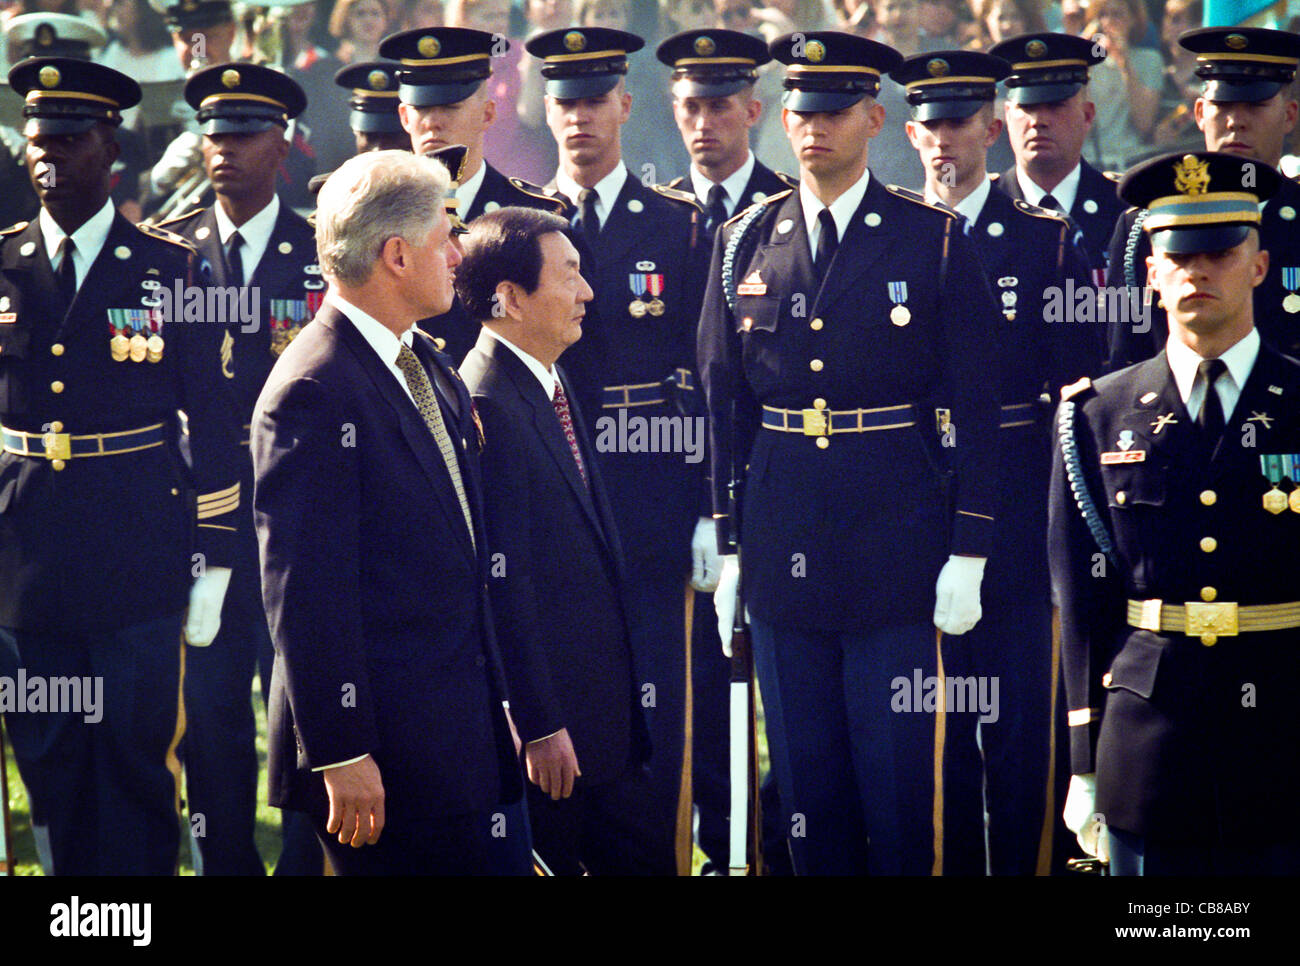 US President Bill Clinton and Chinese Premier Zhu Rongji review the honor guard during the official arrival ceremony at the White House April 8, 1999 in Washington D.C. Stock Photo